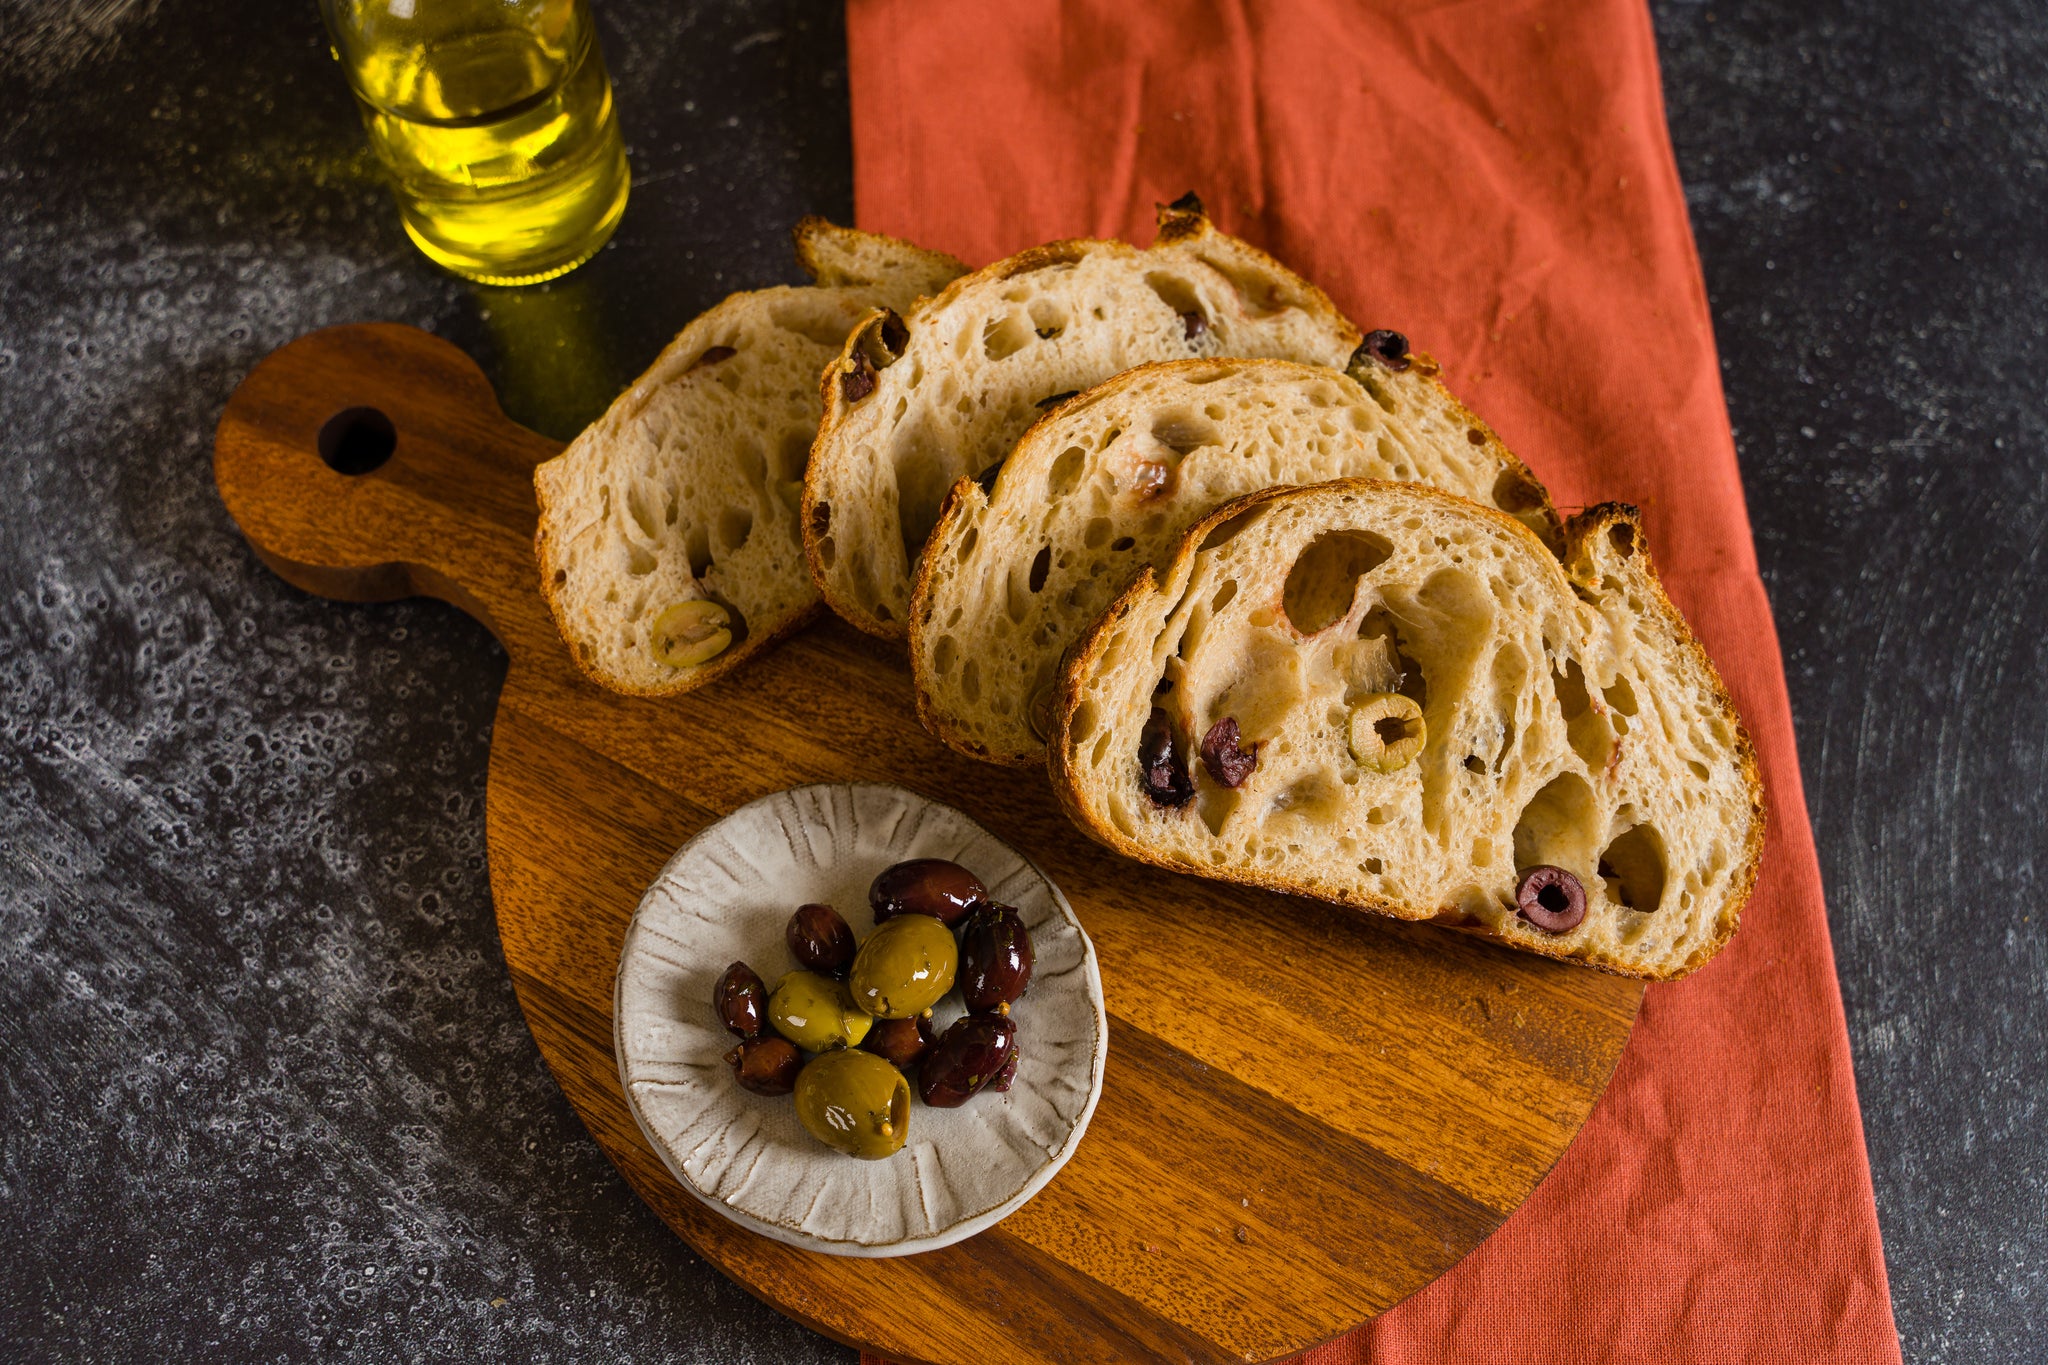 Slice of olive sourdough arranged on a round wooden cutting board with a dish of mixed olives to the left